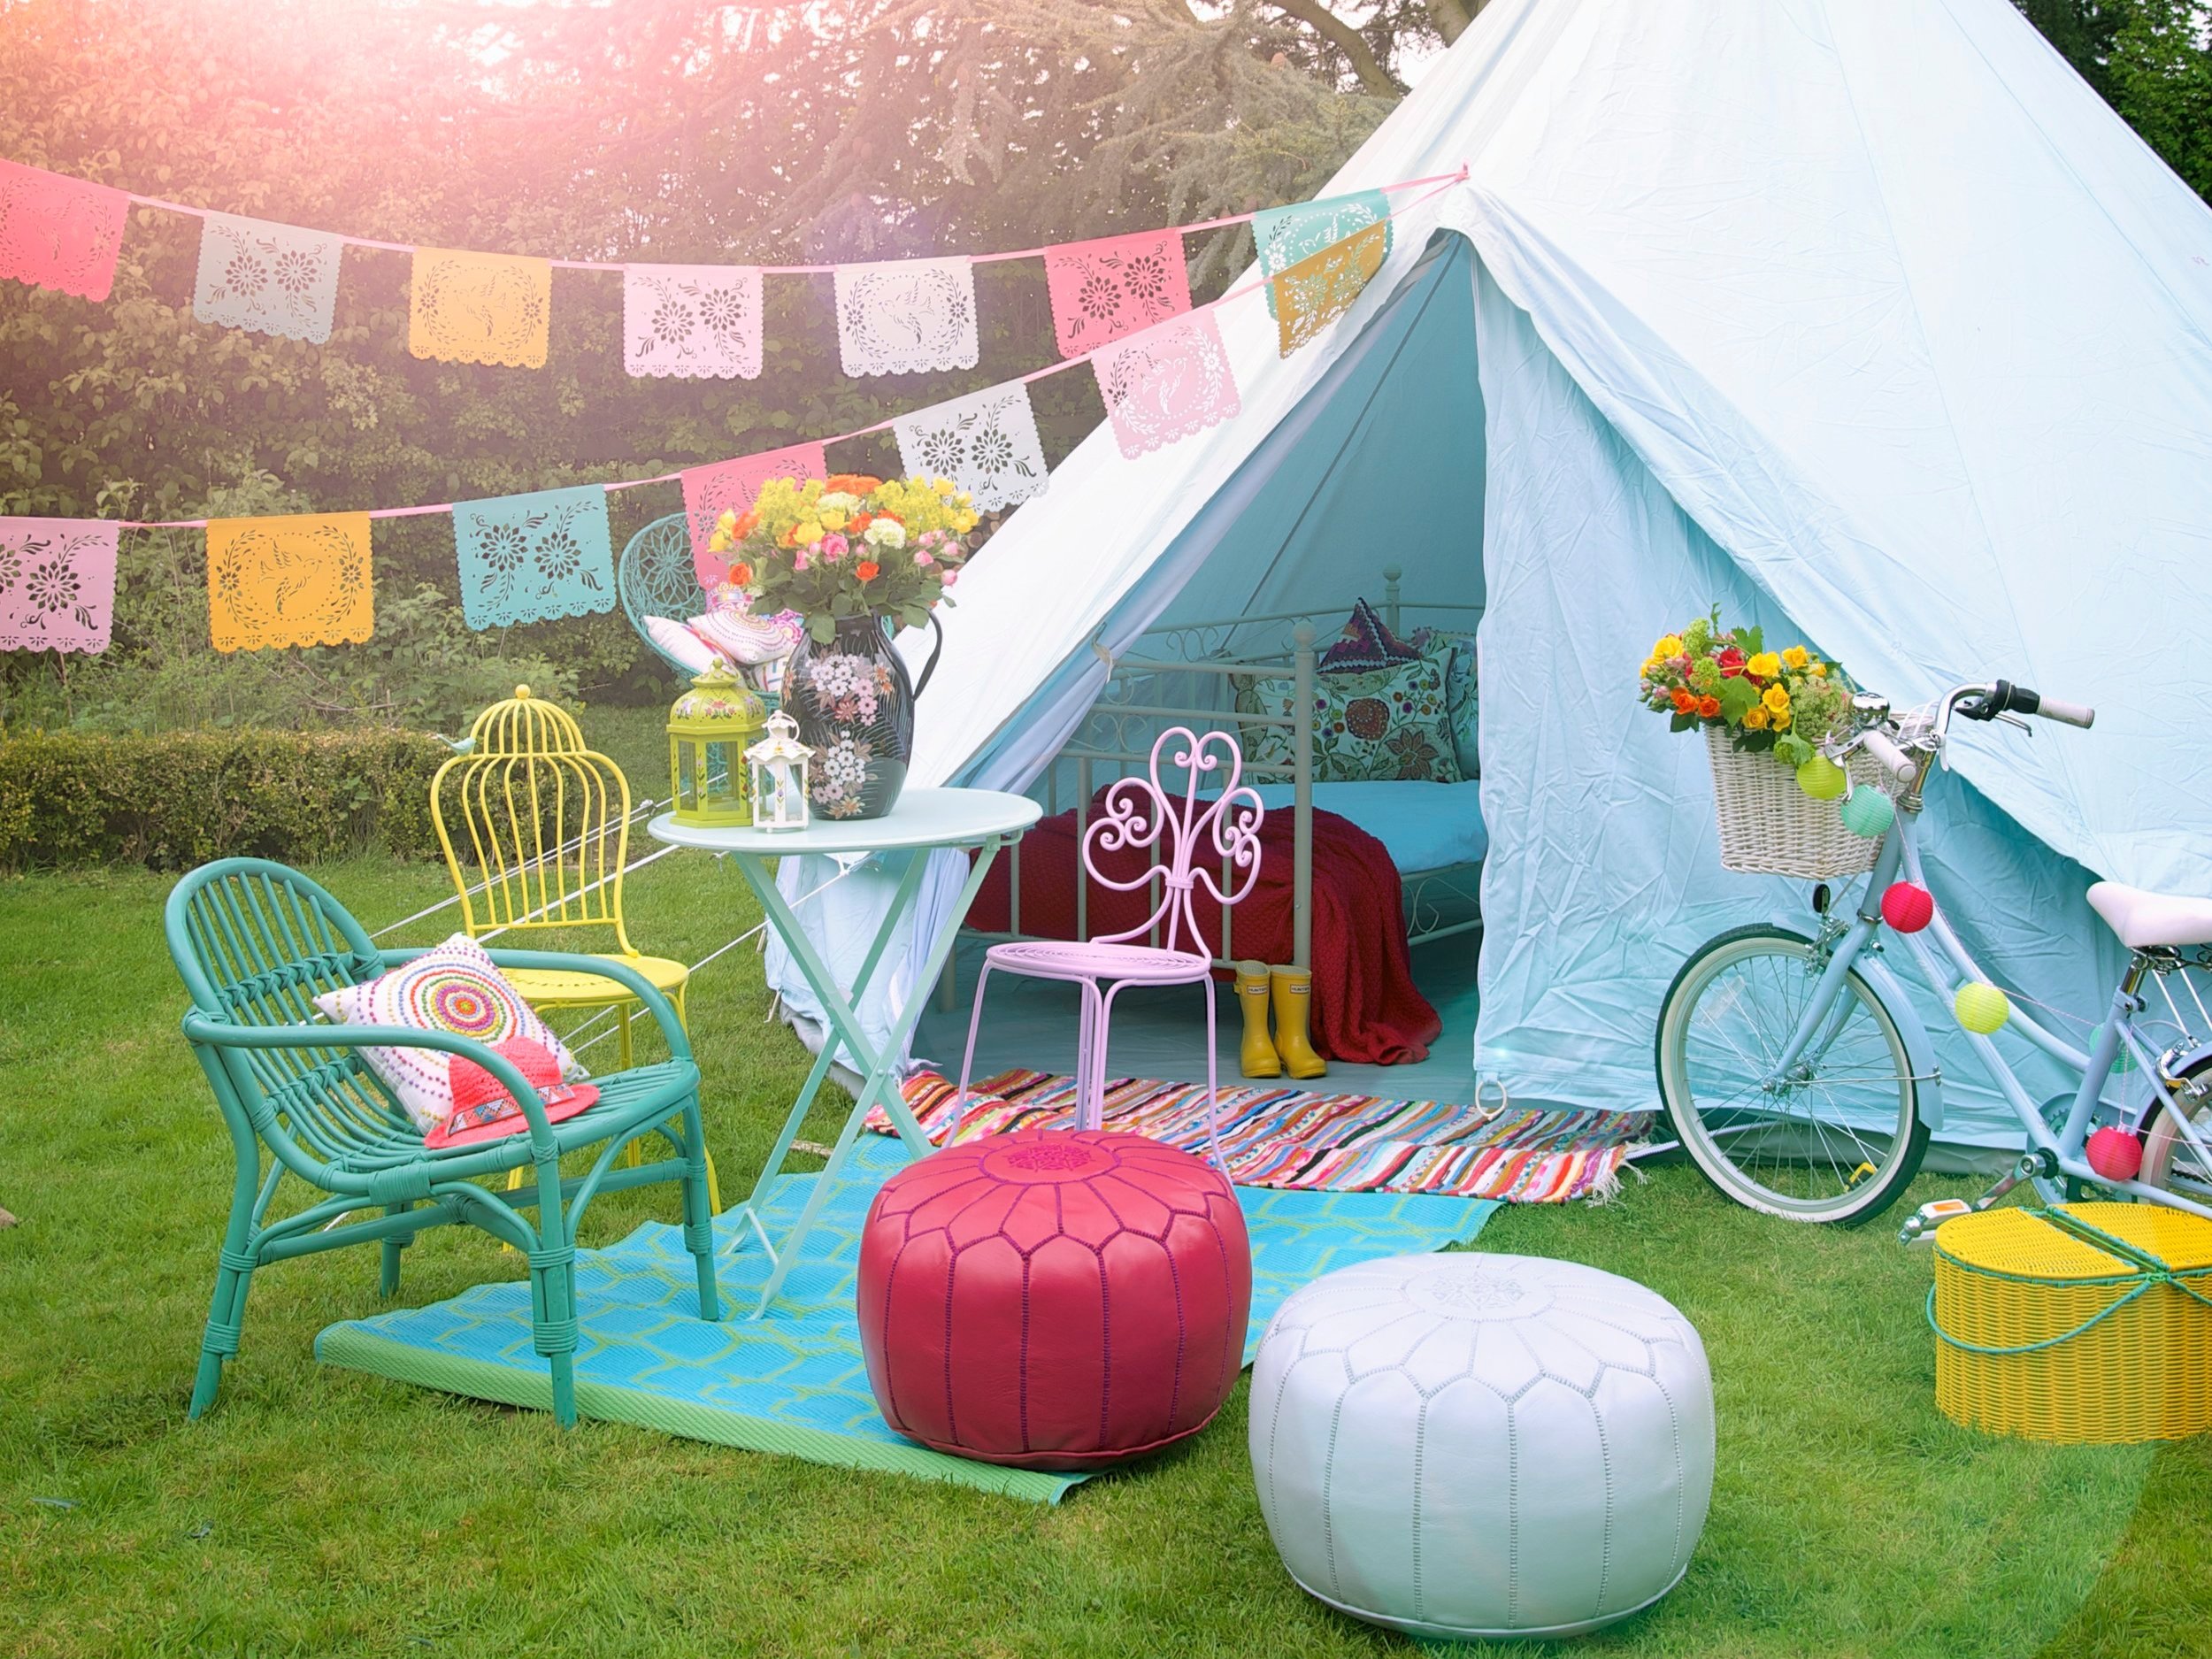 living4media_11321804_HiRes_Party_atmosphere_in_garden_seating_area_with_colourful_seats_in_front_of_tent_decorated_with_bunting.jpg